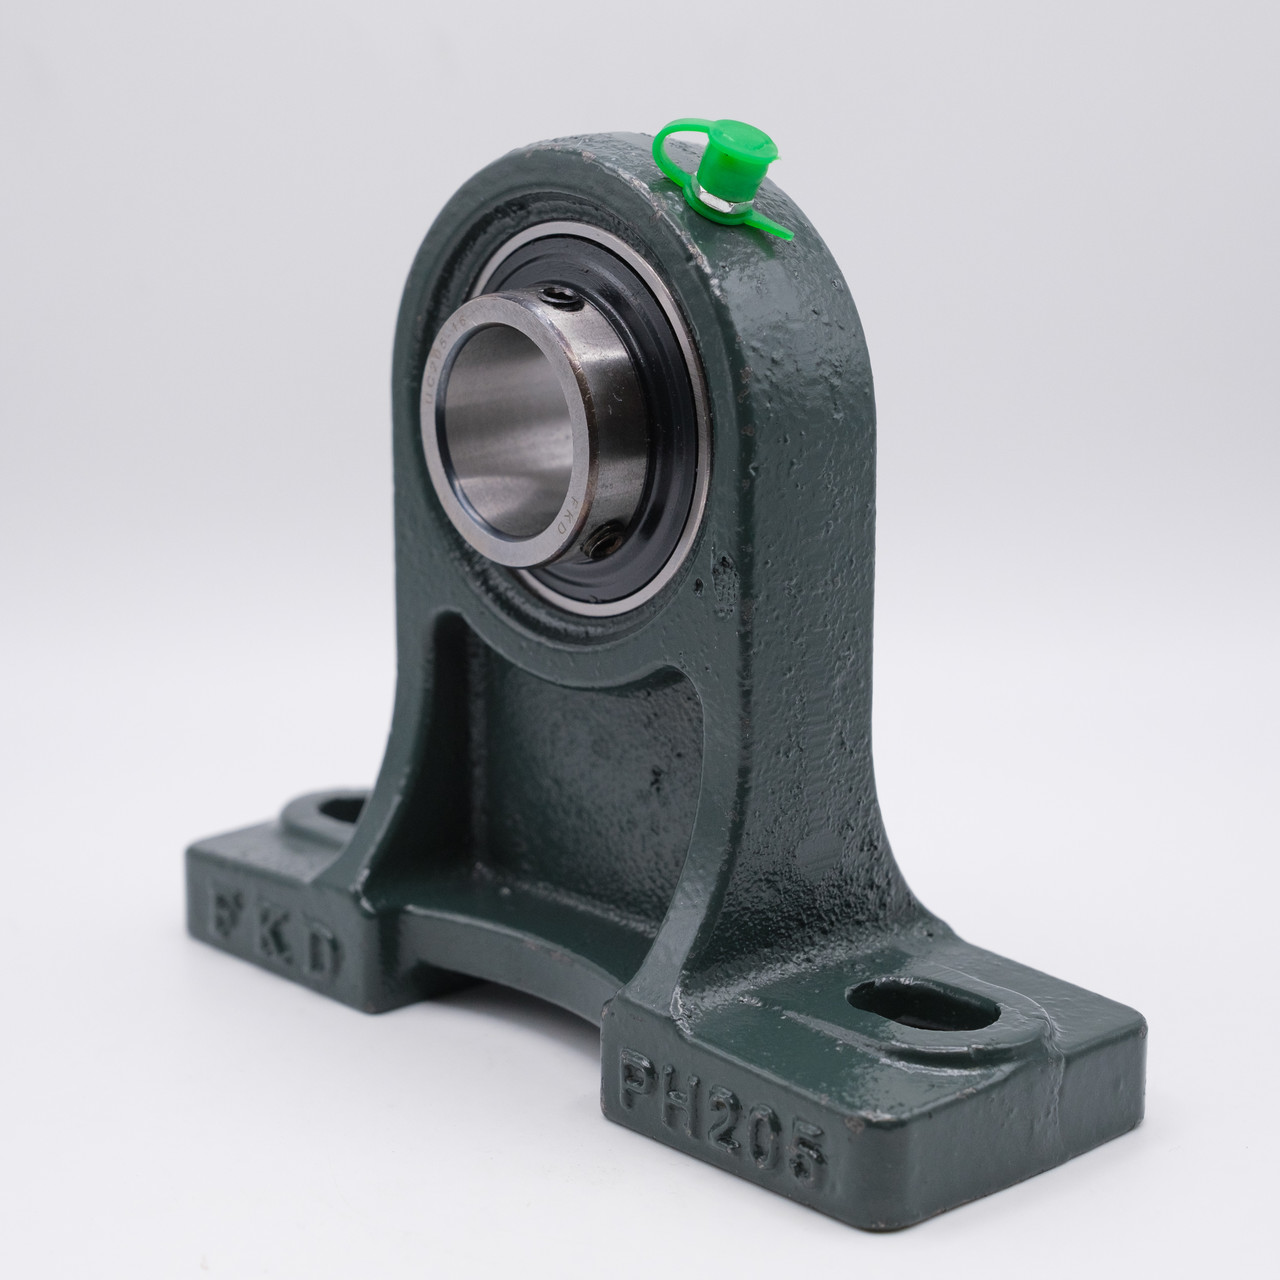 UCPH205 GENERIC 25mm Normal duty 2 Bolt Cast Iron Pillow Block Housed Unit Bearing with extended base to centre height - Metric Thumbnail